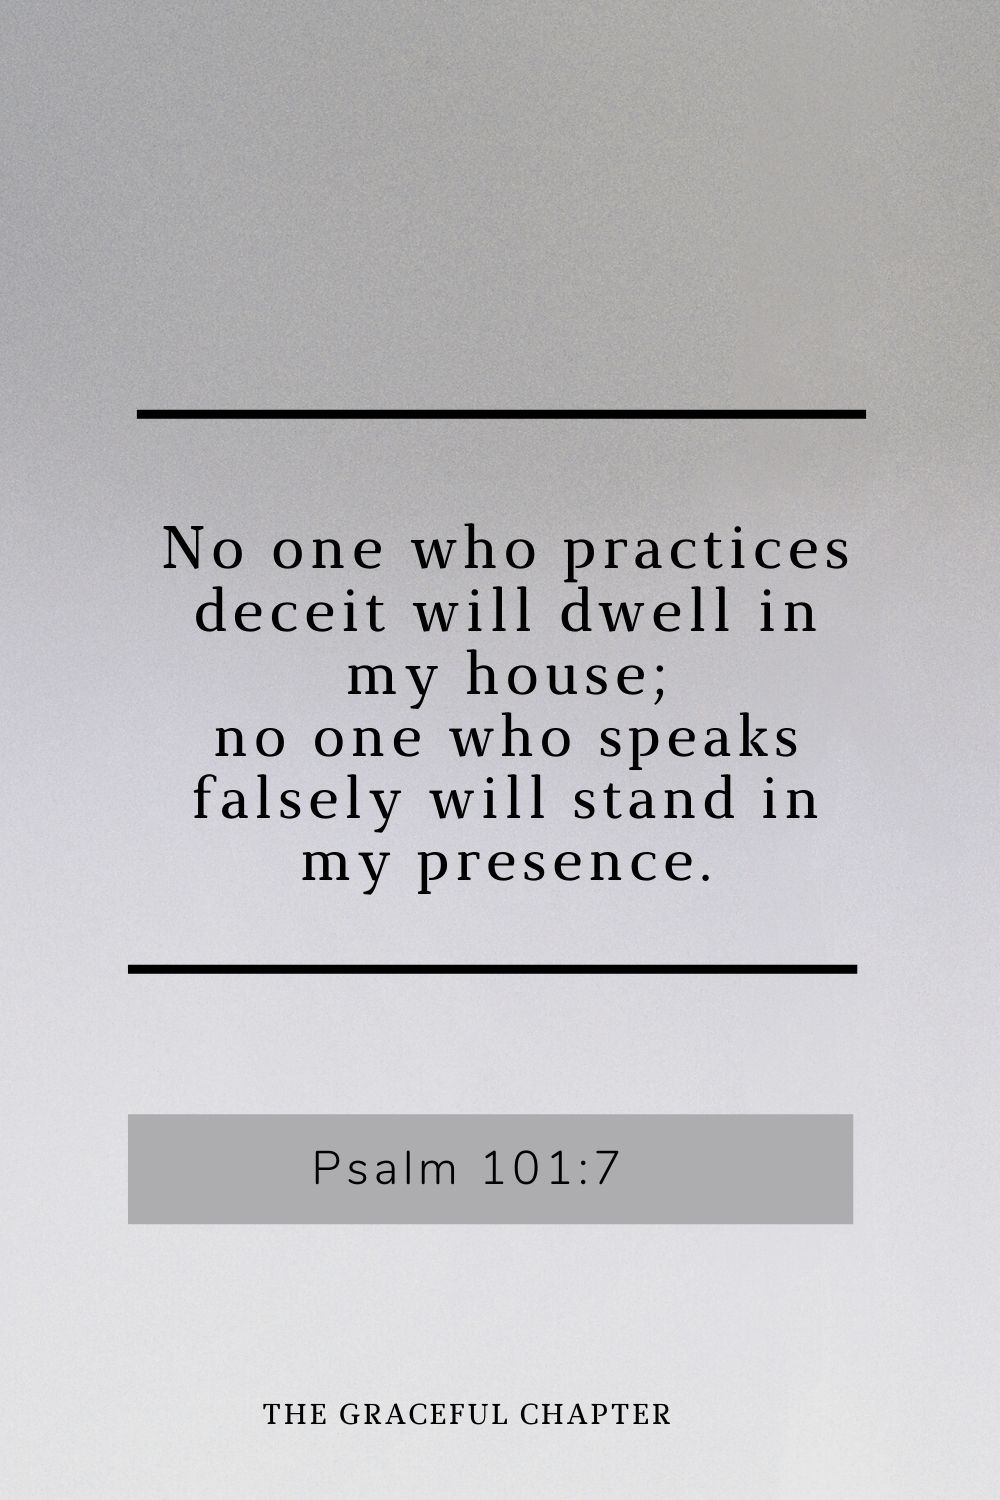 No one who practices deceit will dwell in my house; no one who speaks falsely will stand in my presence. Psalm 101:7